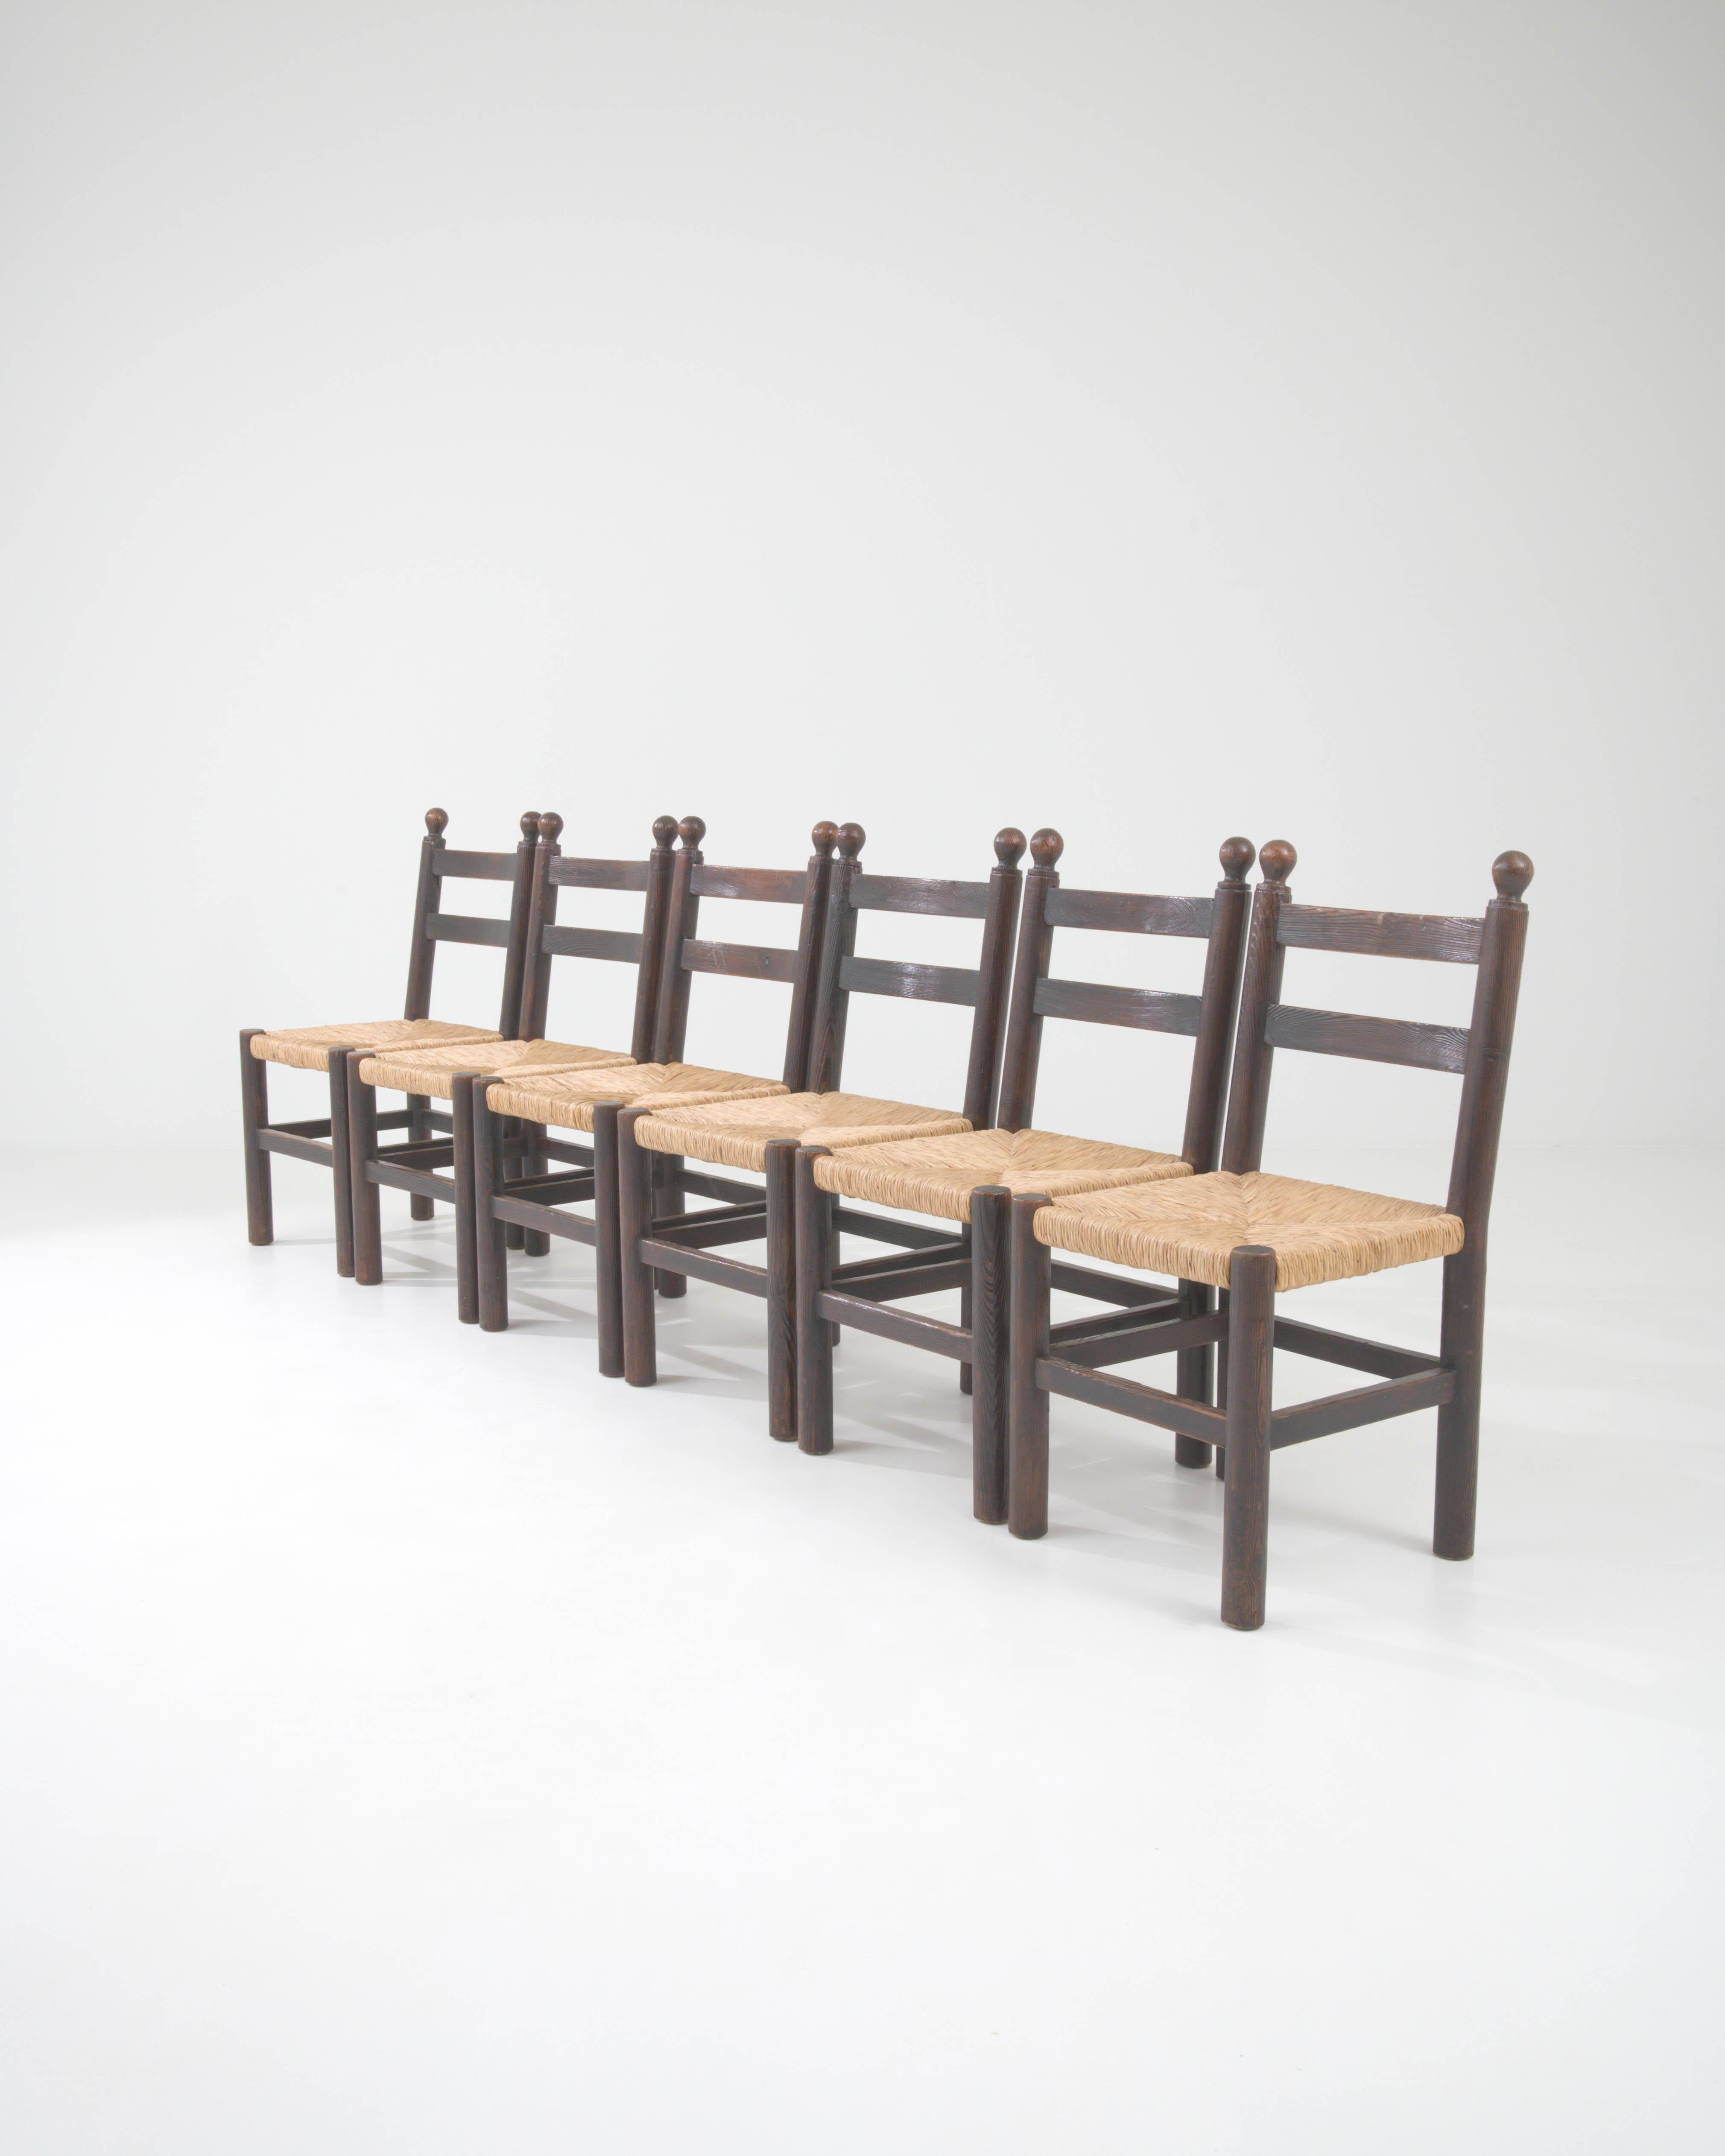 20th Century French Wooden Dining Chairs With Wicker Seats, Set of 6 For Sale 9